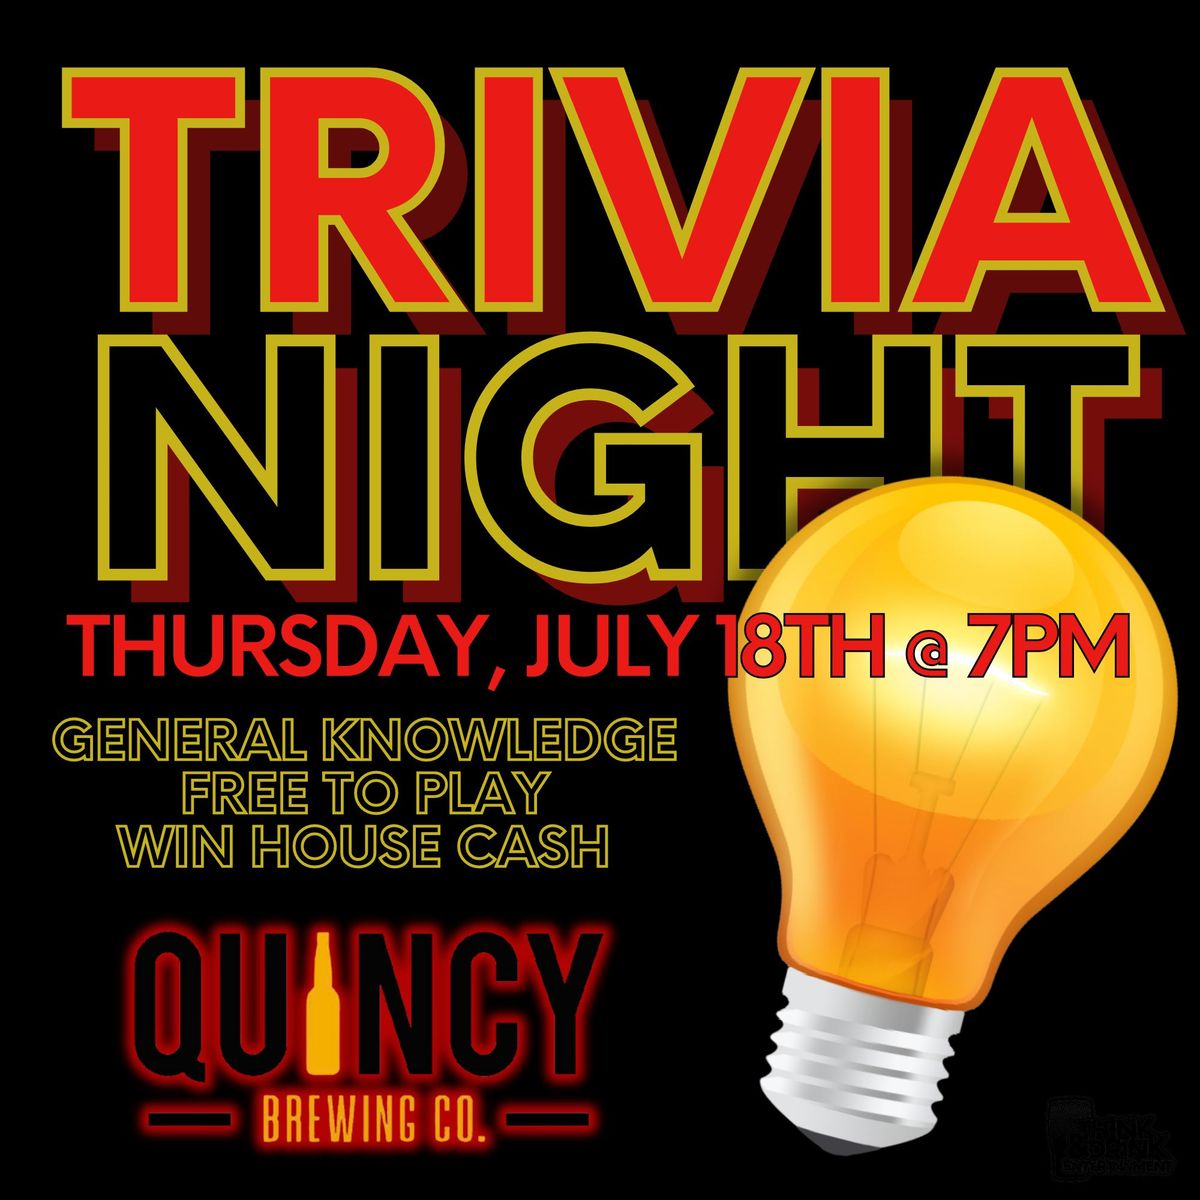 General Knowledge Trivia Night @ Quincy Brewing Company (Quincy, IL) \/ Thursday, July 18th @ 7pm